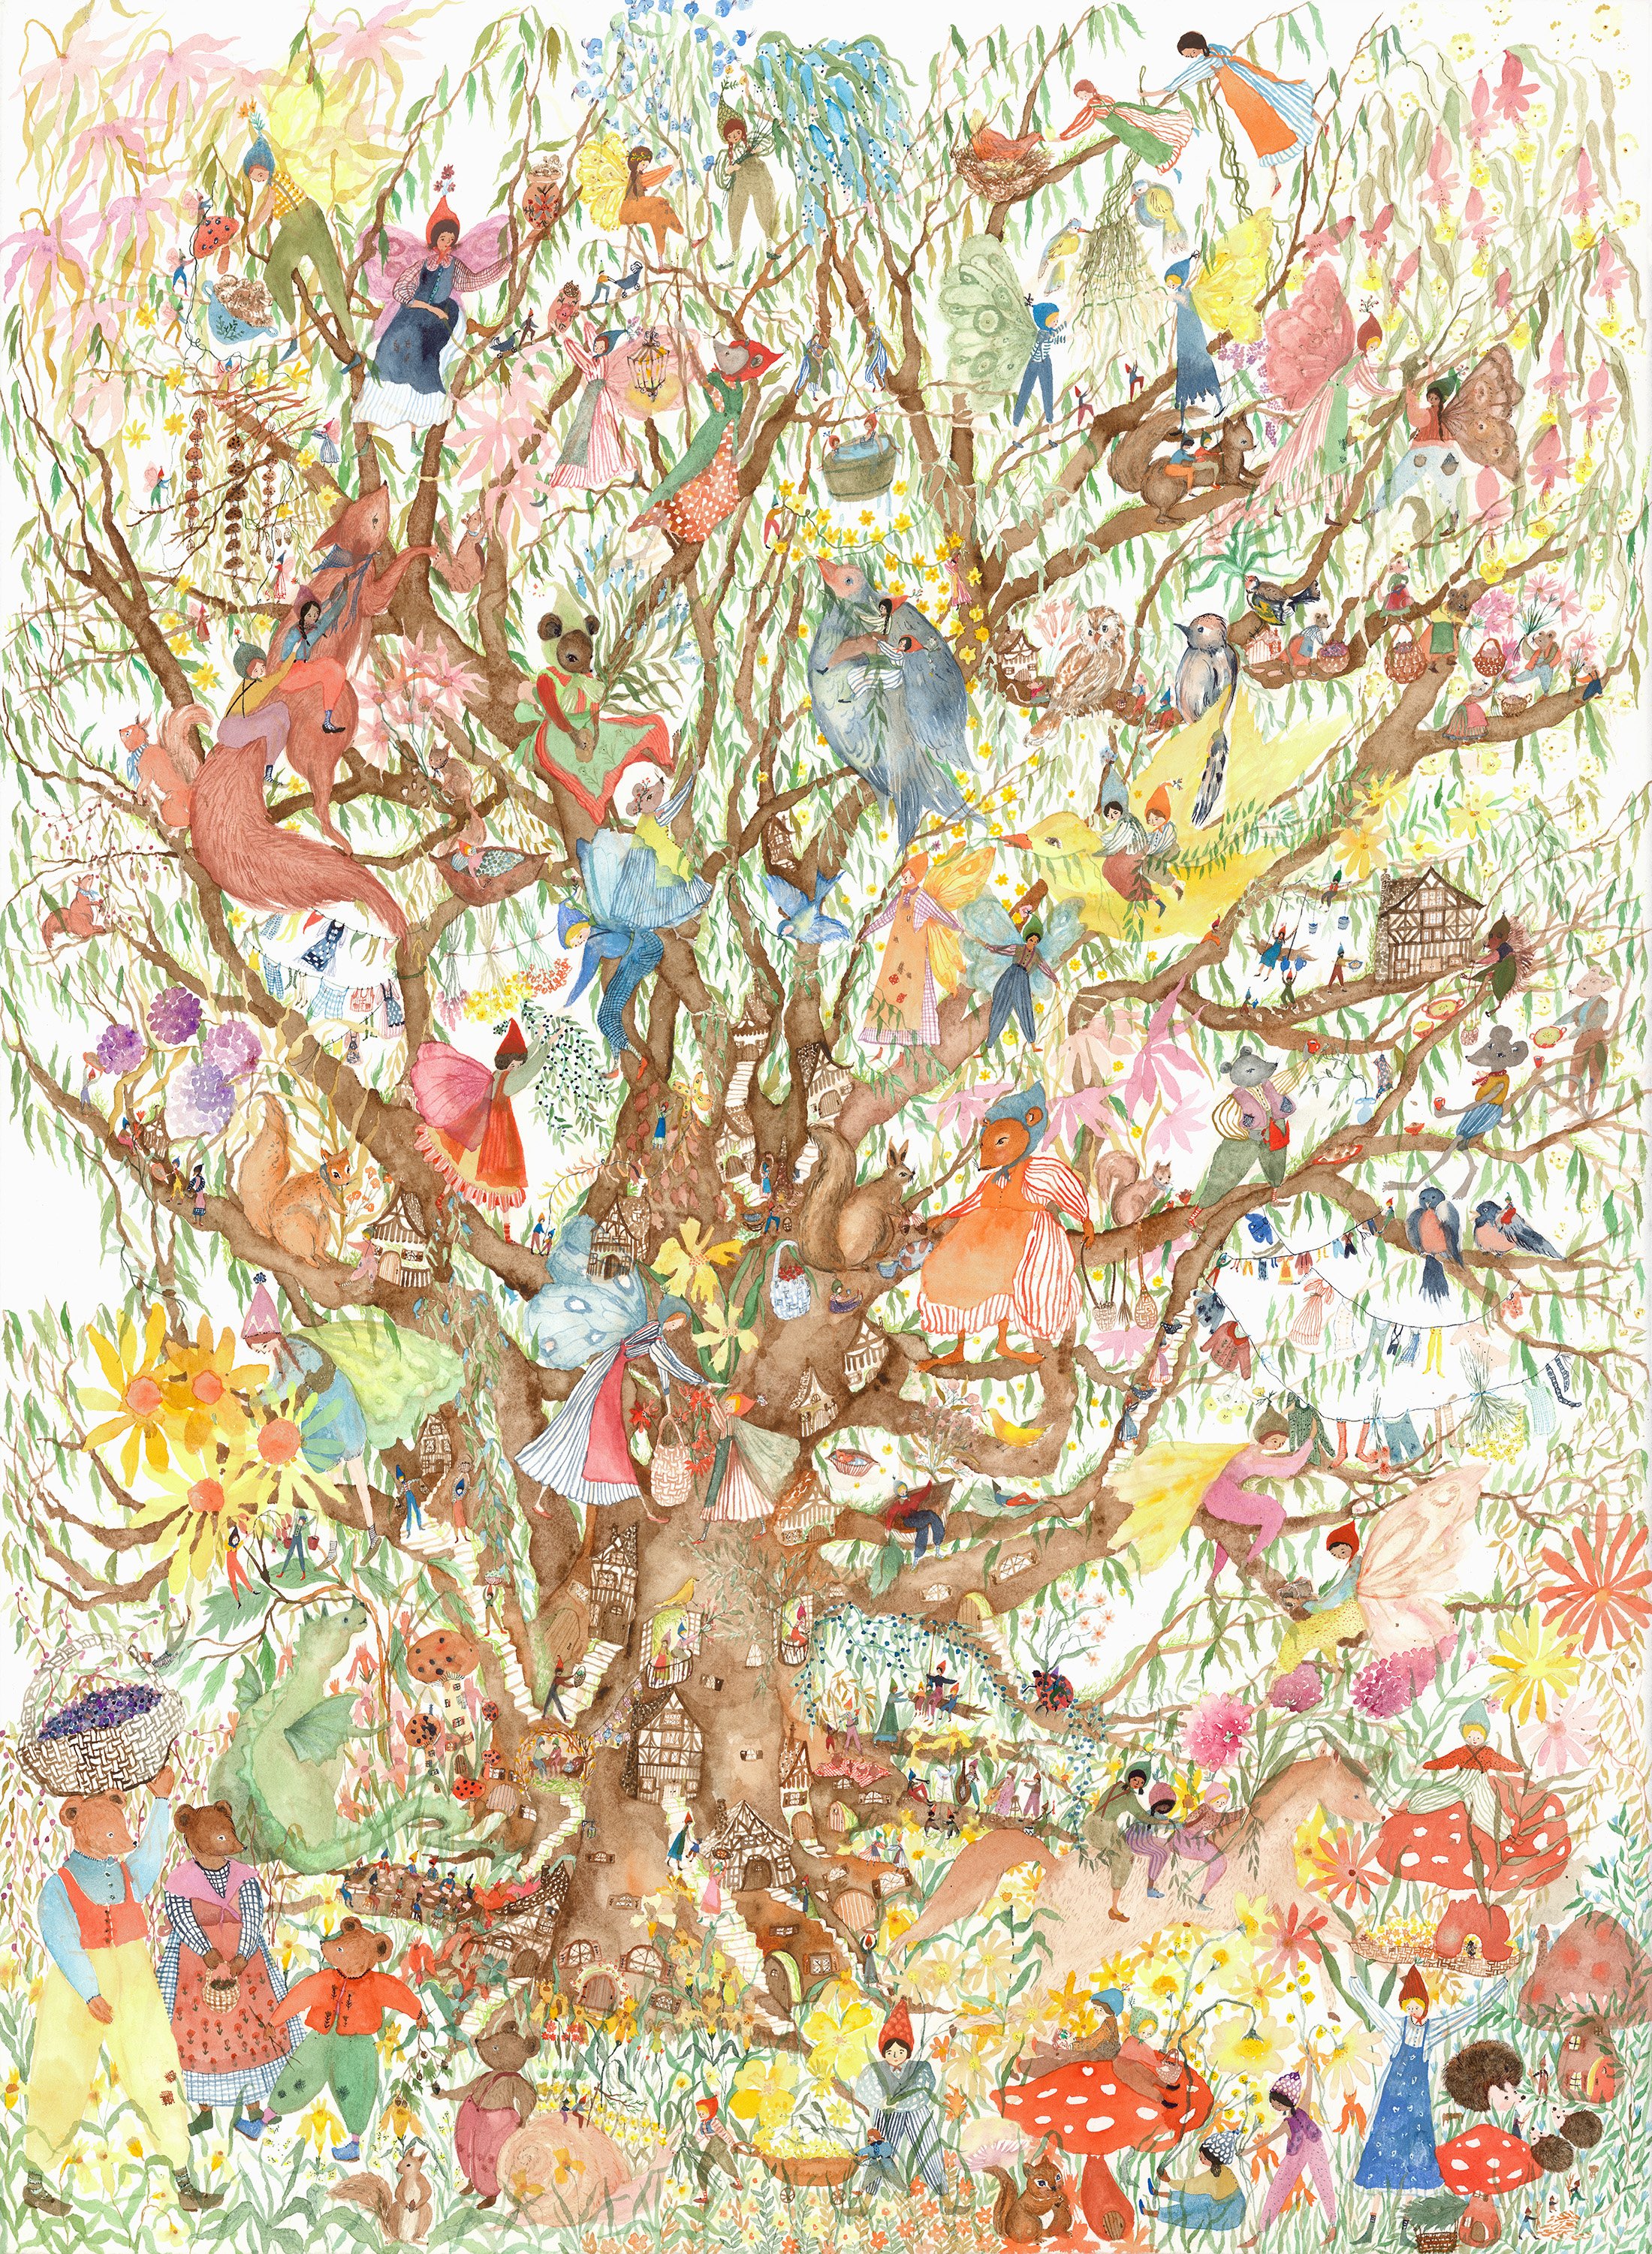   Fairy Tree   Watercolor on paper, 2023  22” x 30”  $4500  Sold 